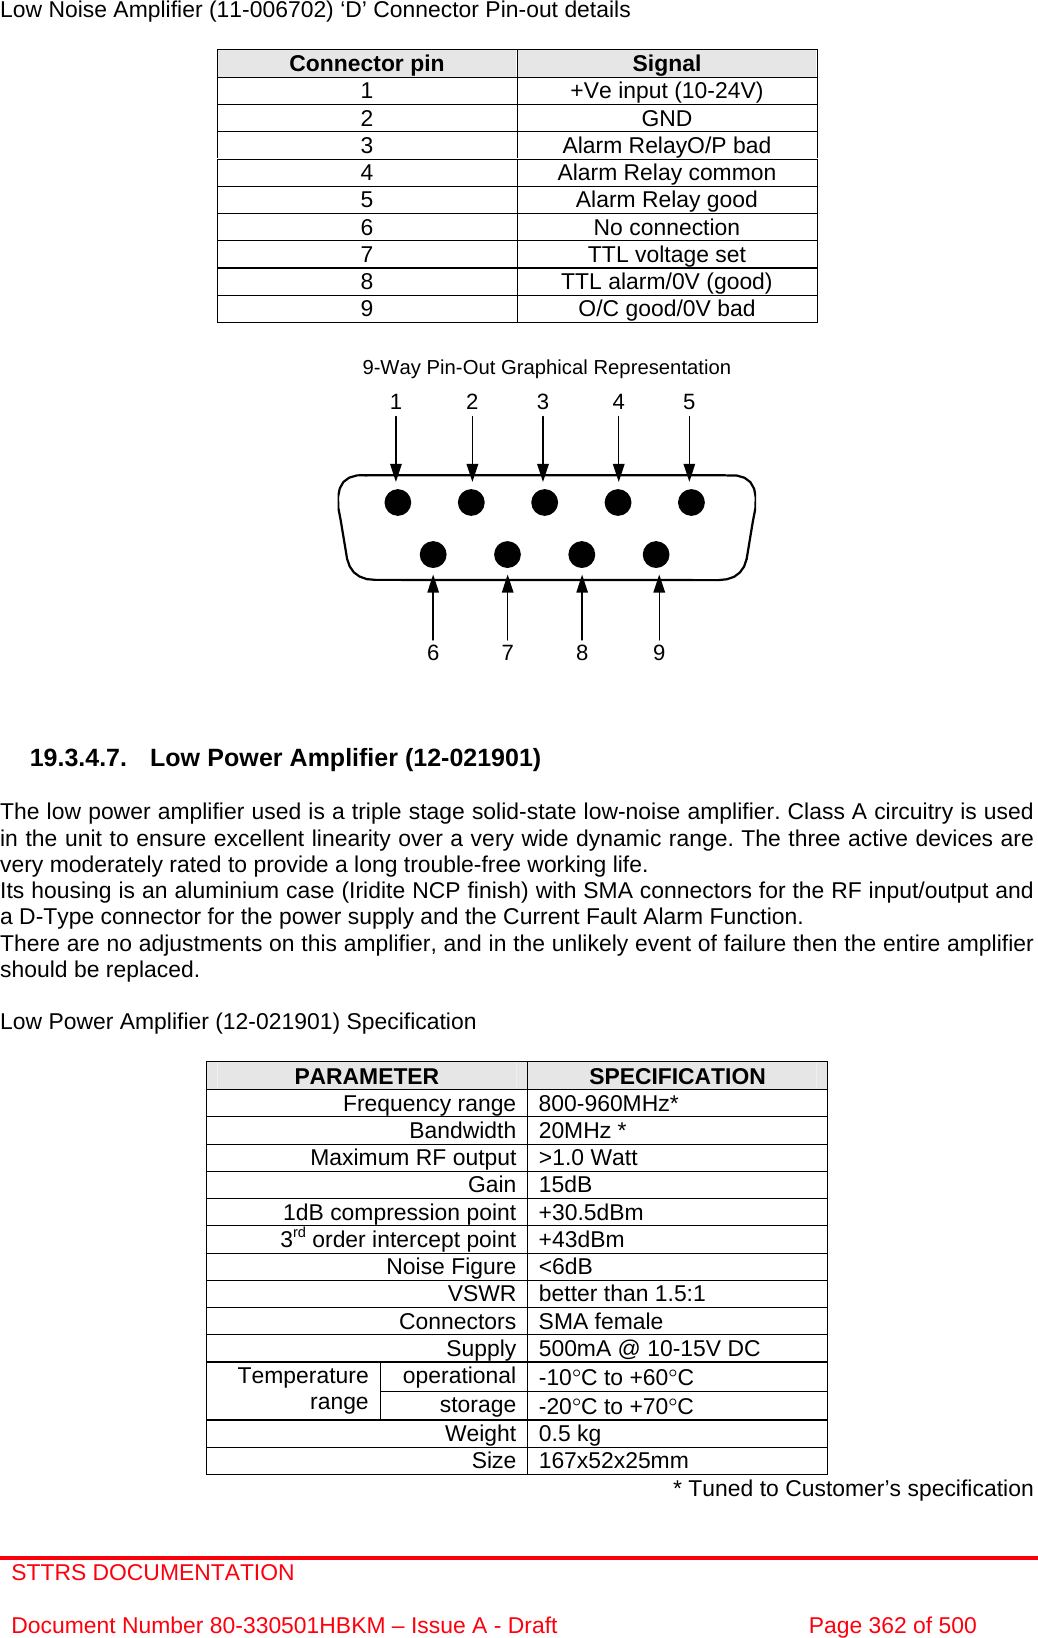 STTRS DOCUMENTATION  Document Number 80-330501HBKM – Issue A - Draft  Page 362 of 500  7 8 961 2 3 4 59-Way Pin-Out Graphical Representation Low Noise Amplifier (11-006702) ‘D’ Connector Pin-out details  Connector pin  Signal 1  +Ve input (10-24V) 2 GND 3  Alarm RelayO/P bad 4  Alarm Relay common 5  Alarm Relay good 6 No connection 7  TTL voltage set 8  TTL alarm/0V (good) 9  O/C good/0V bad                 19.3.4.7.  Low Power Amplifier (12-021901)  The low power amplifier used is a triple stage solid-state low-noise amplifier. Class A circuitry is used in the unit to ensure excellent linearity over a very wide dynamic range. The three active devices are very moderately rated to provide a long trouble-free working life.  Its housing is an aluminium case (Iridite NCP finish) with SMA connectors for the RF input/output and a D-Type connector for the power supply and the Current Fault Alarm Function. There are no adjustments on this amplifier, and in the unlikely event of failure then the entire amplifier should be replaced.  Low Power Amplifier (12-021901) Specification  PARAMETER  SPECIFICATION Frequency range 800-960MHz* Bandwidth 20MHz * Maximum RF output &gt;1.0 Watt Gain 15dB 1dB compression point +30.5dBm 3rd order intercept point +43dBm Noise Figure &lt;6dB VSWR better than 1.5:1 Connectors SMA female Supply 500mA @ 10-15V DC operational -10°C to +60°C Temperature range  storage -20°C to +70°C Weight 0.5 kg Size 167x52x25mm * Tuned to Customer’s specification 